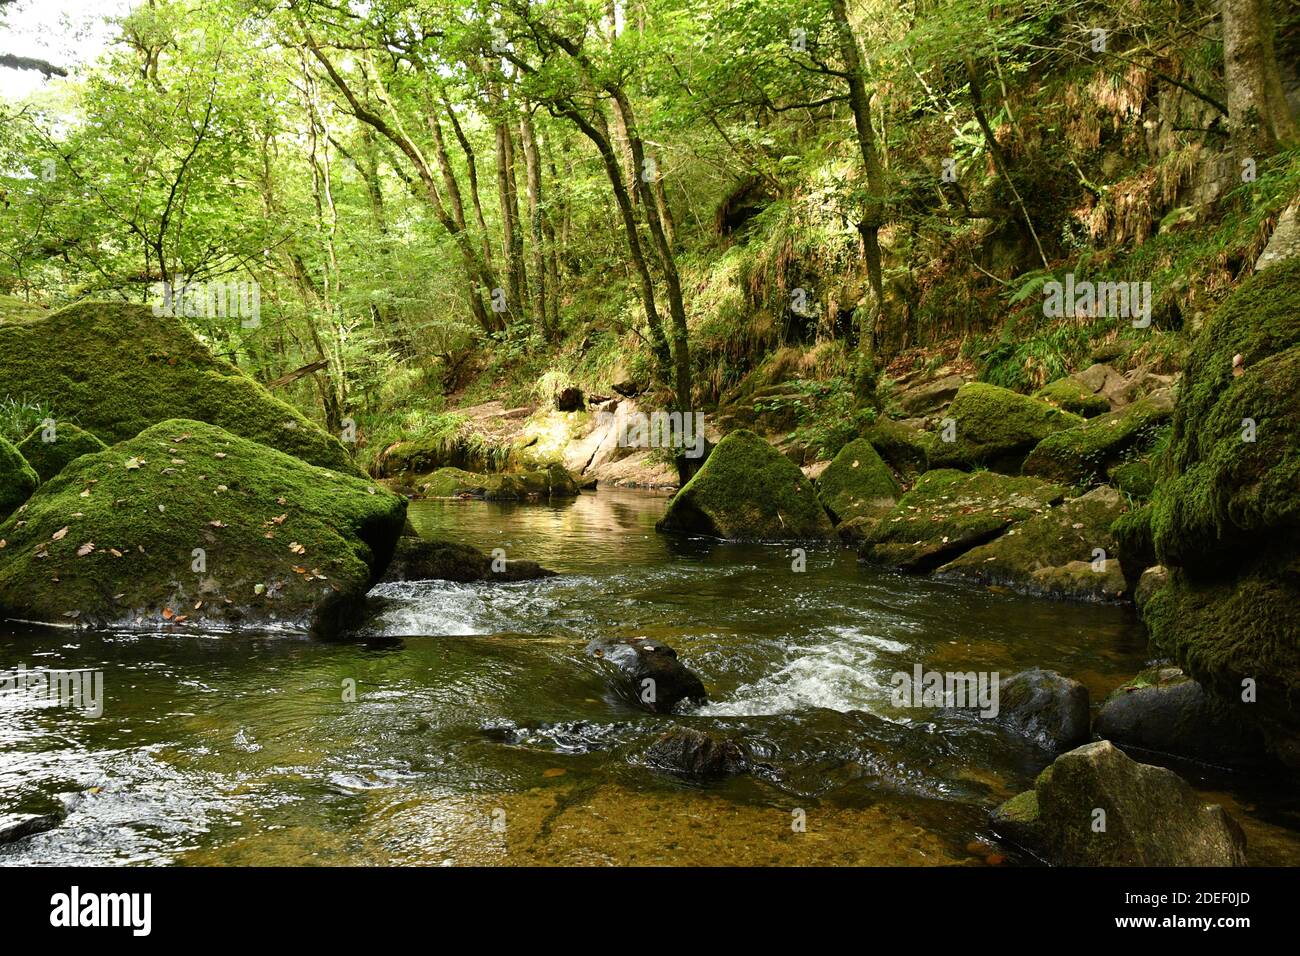 Cascade on the Fowey river at the Golitha Falls as it passes through the ancient Oak woodlands on the edge of Bodmin moor in Cornwall.UK Stock Photo